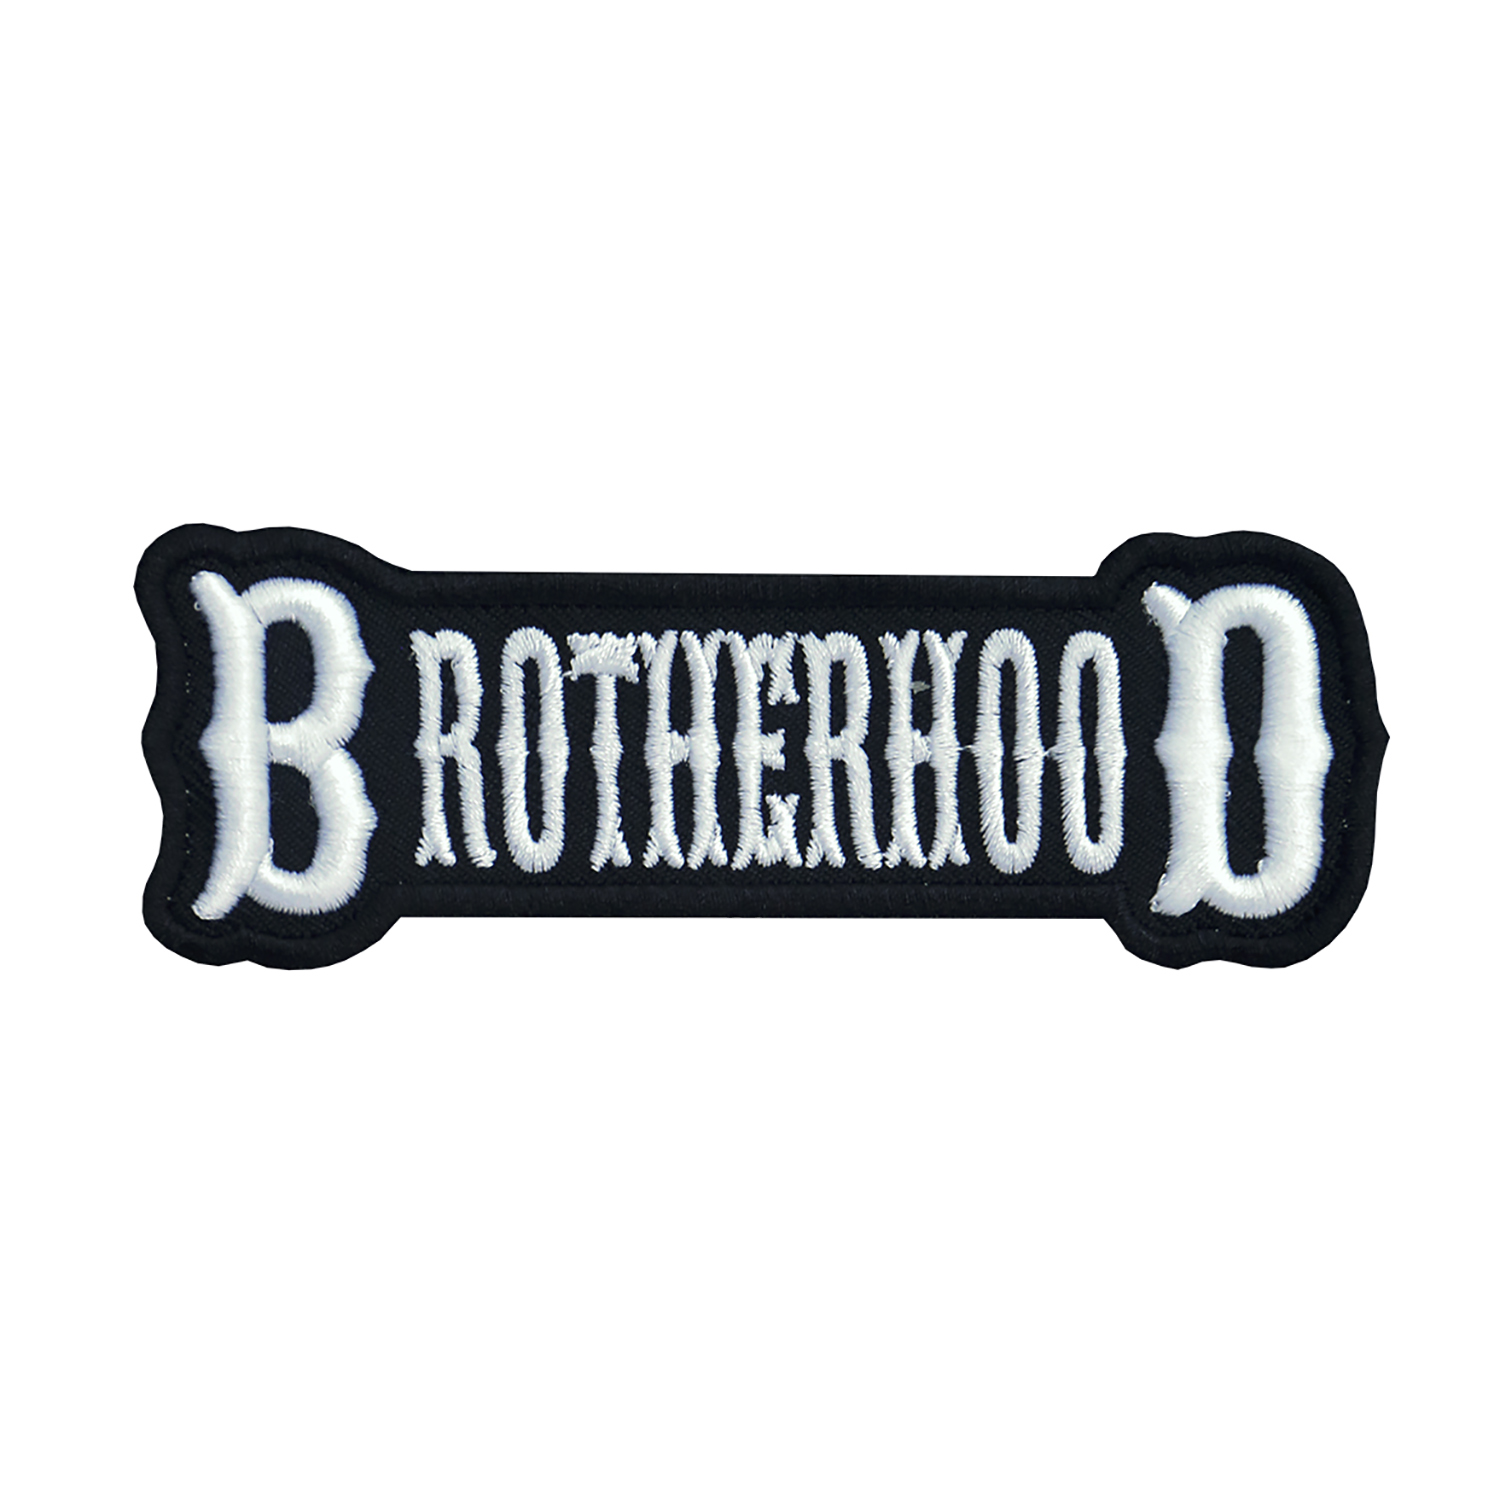 NC PATCHES BROTHERHOOD EMBROIDERED BIKER PATCH